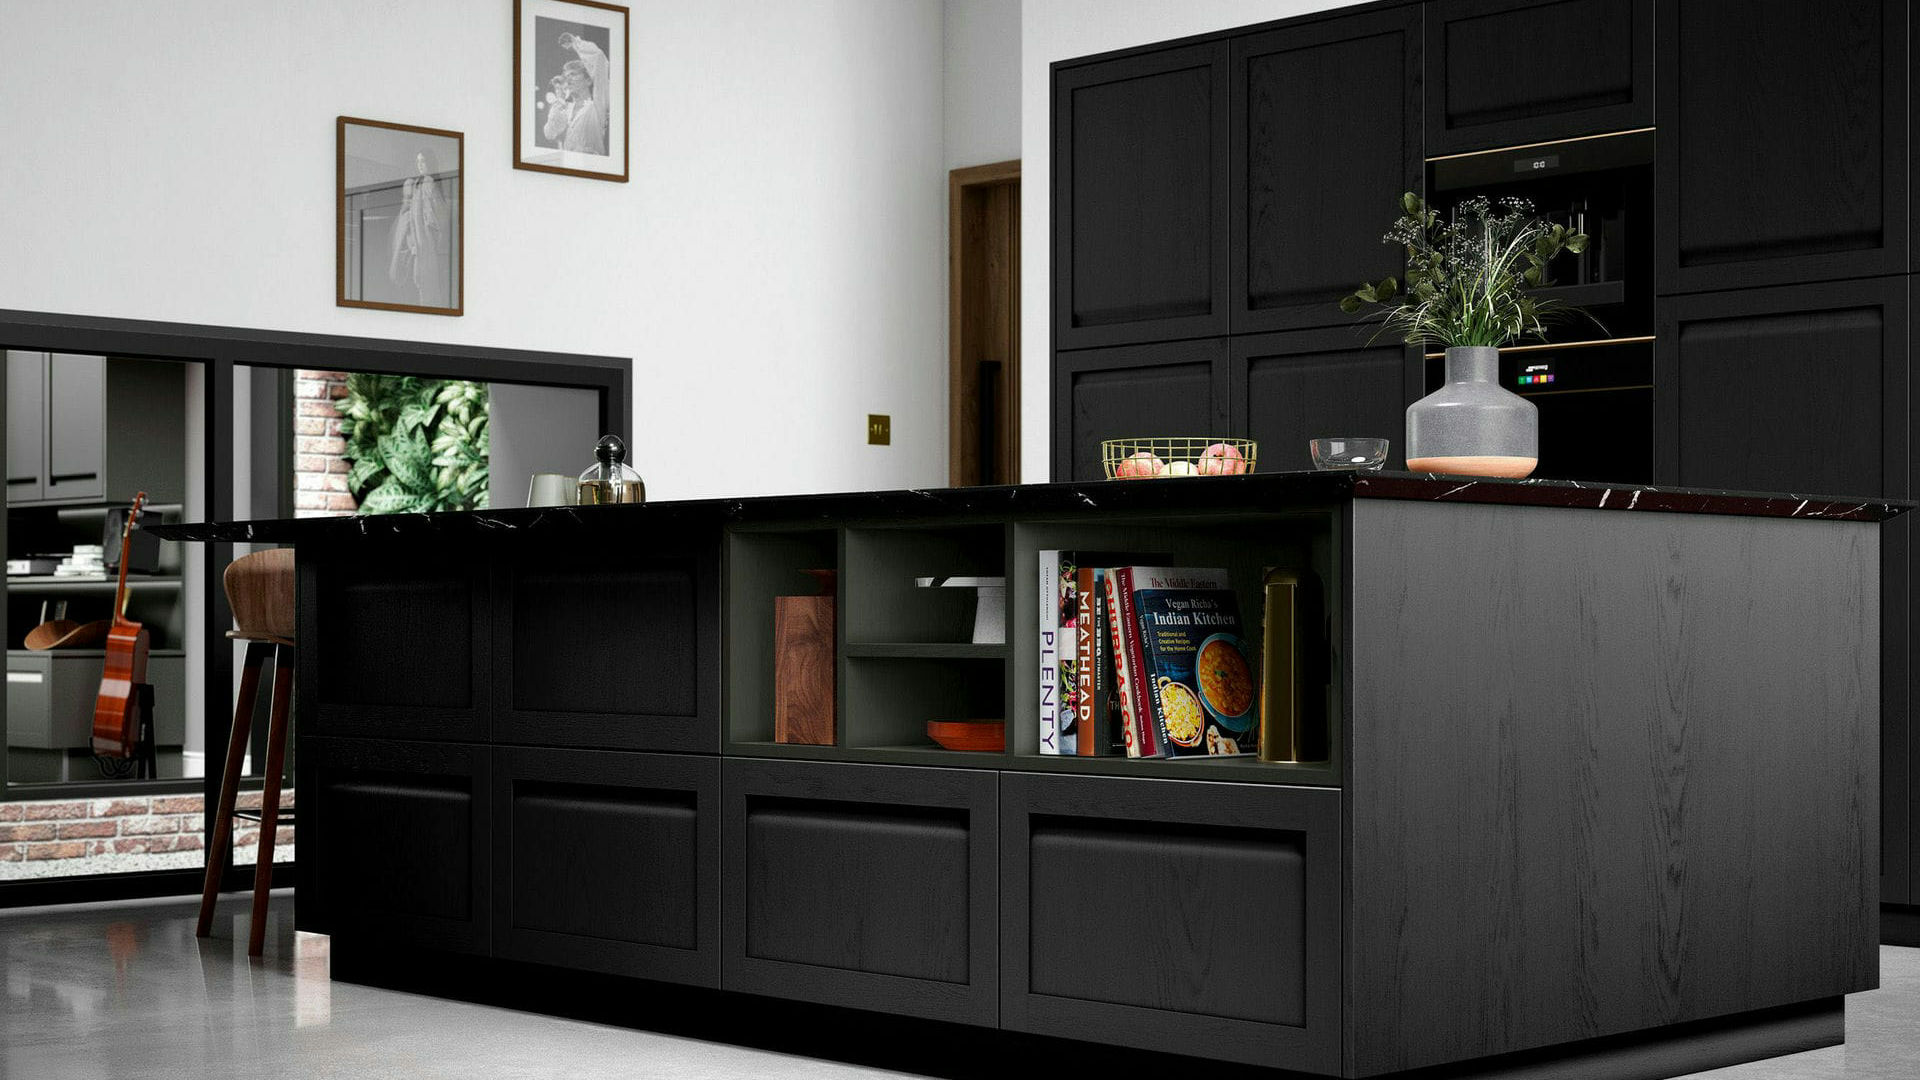 Handleless solid wood Cannon Black kitchens merging sleek design with the warmth of wood in a bold palette